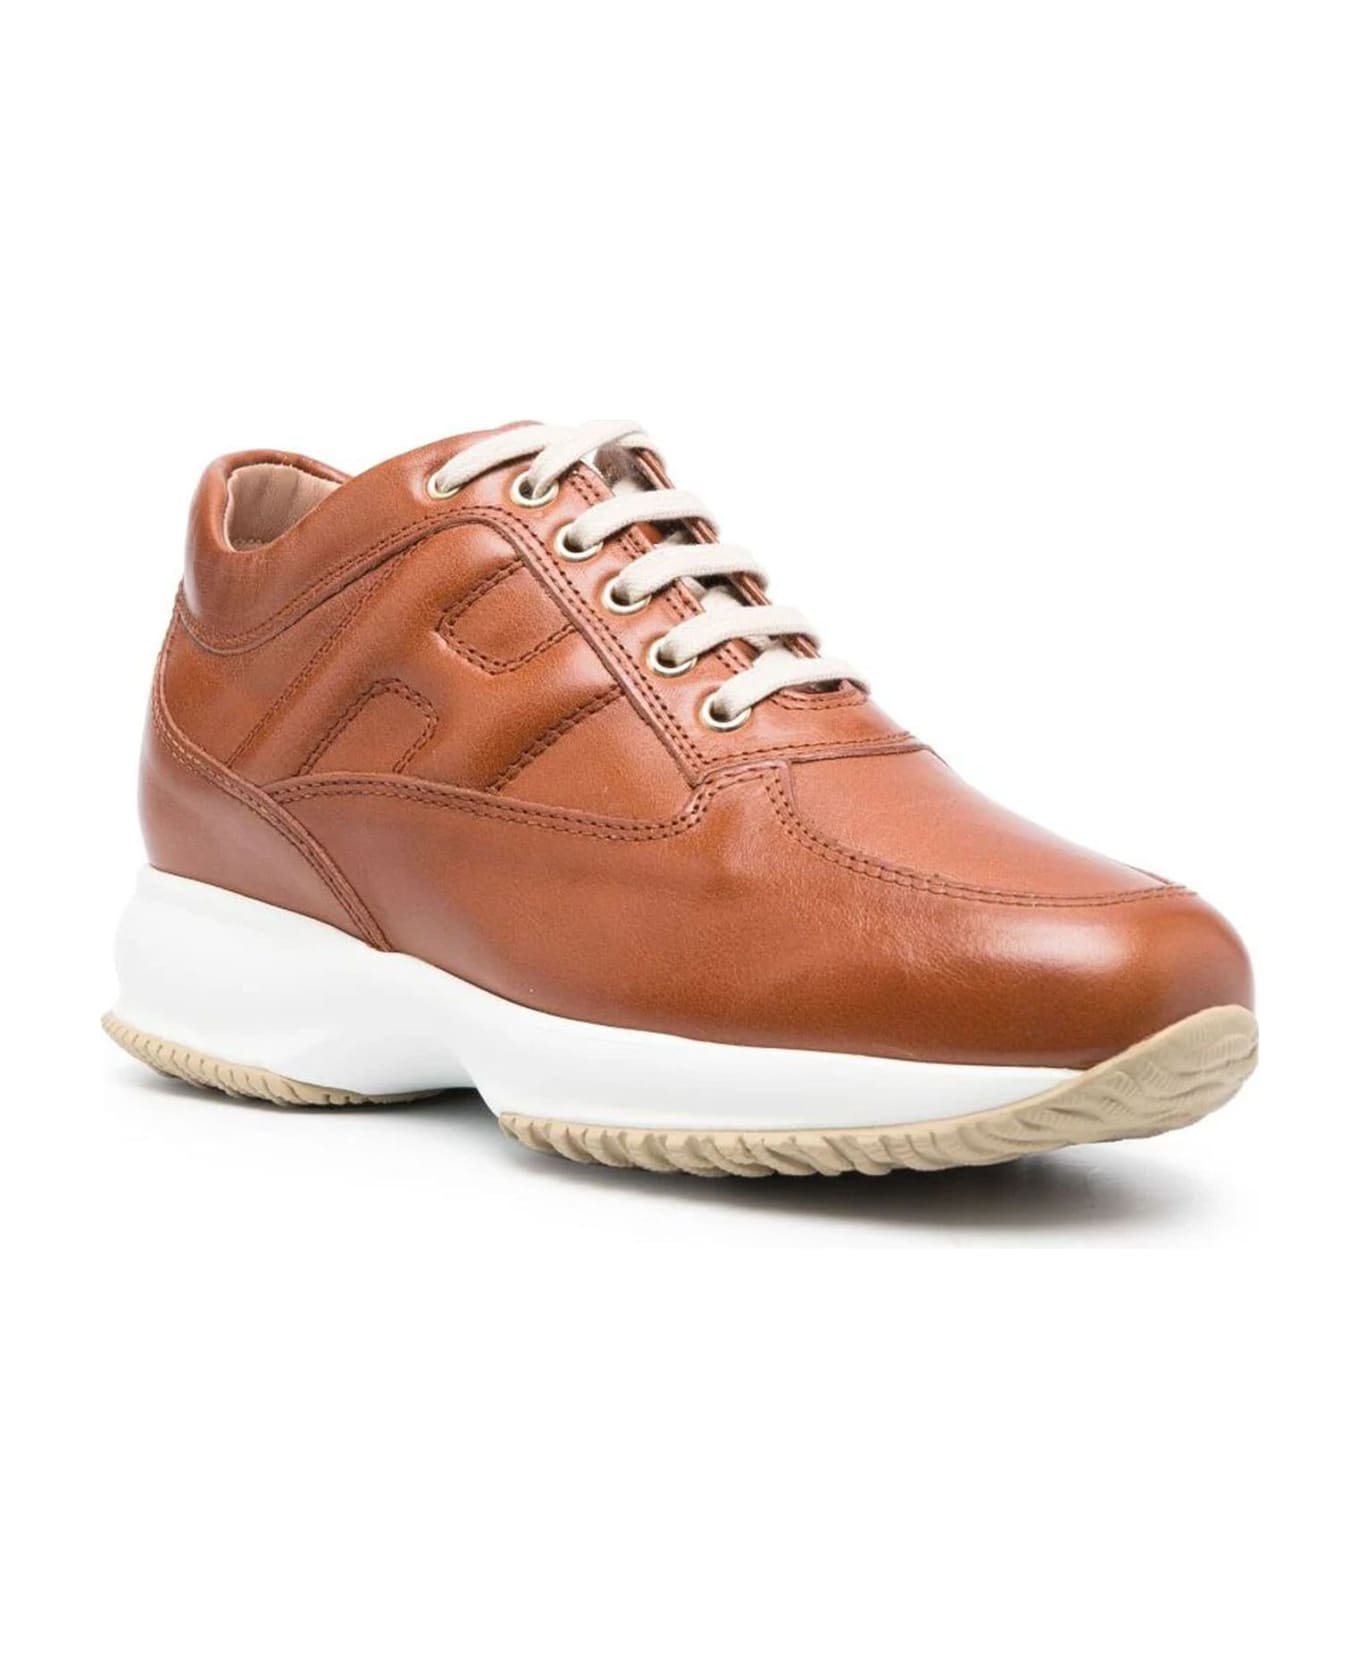 Hogan Interactive Lace-up Sneakers - Marrone スニーカー